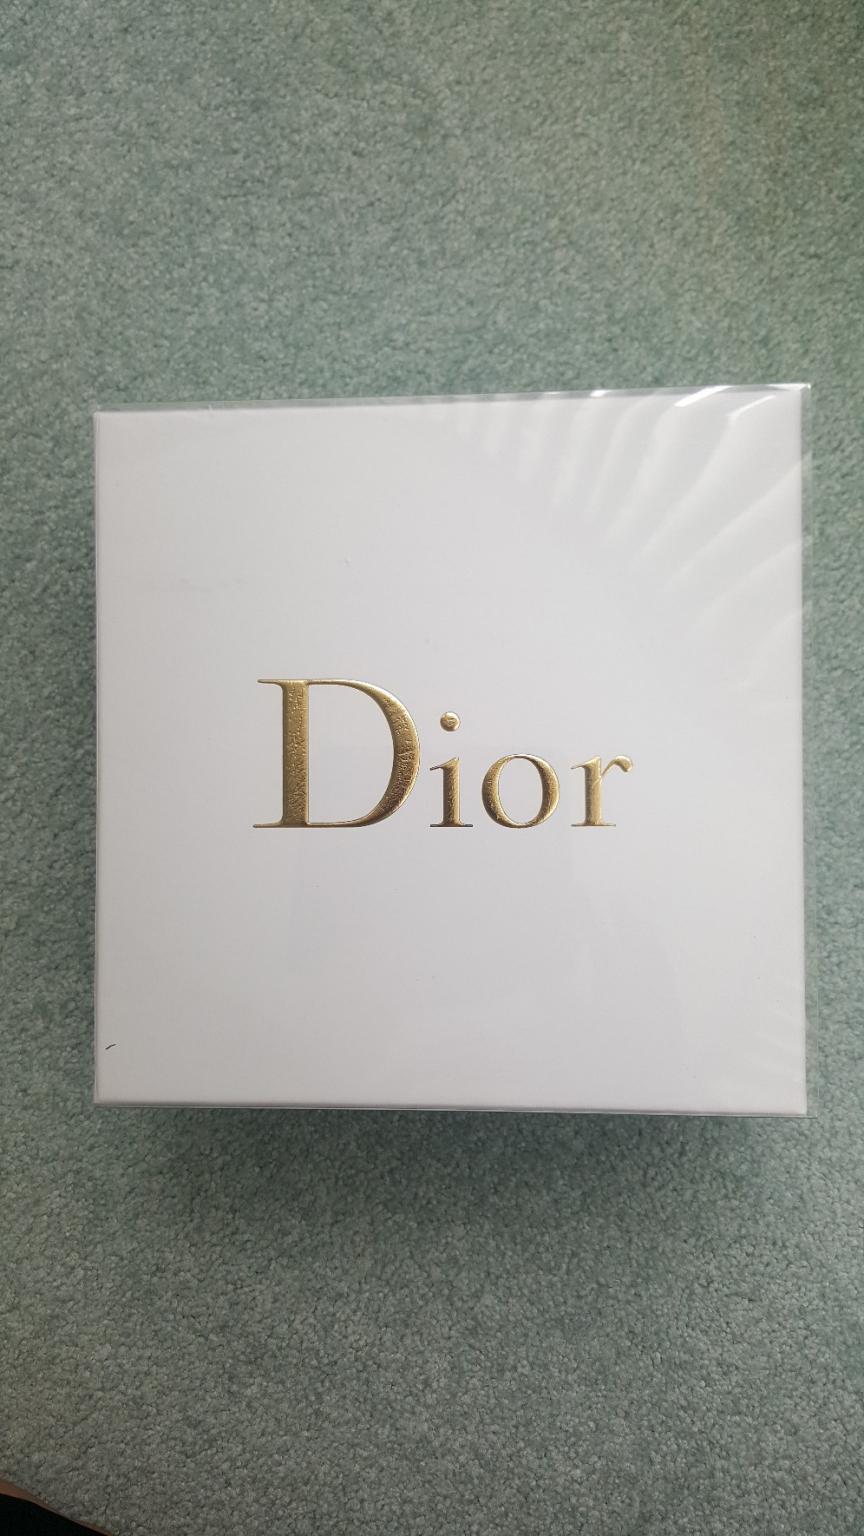 dior j'adore gift set in B36 Birmingham for £65.00 for sale | Shpock